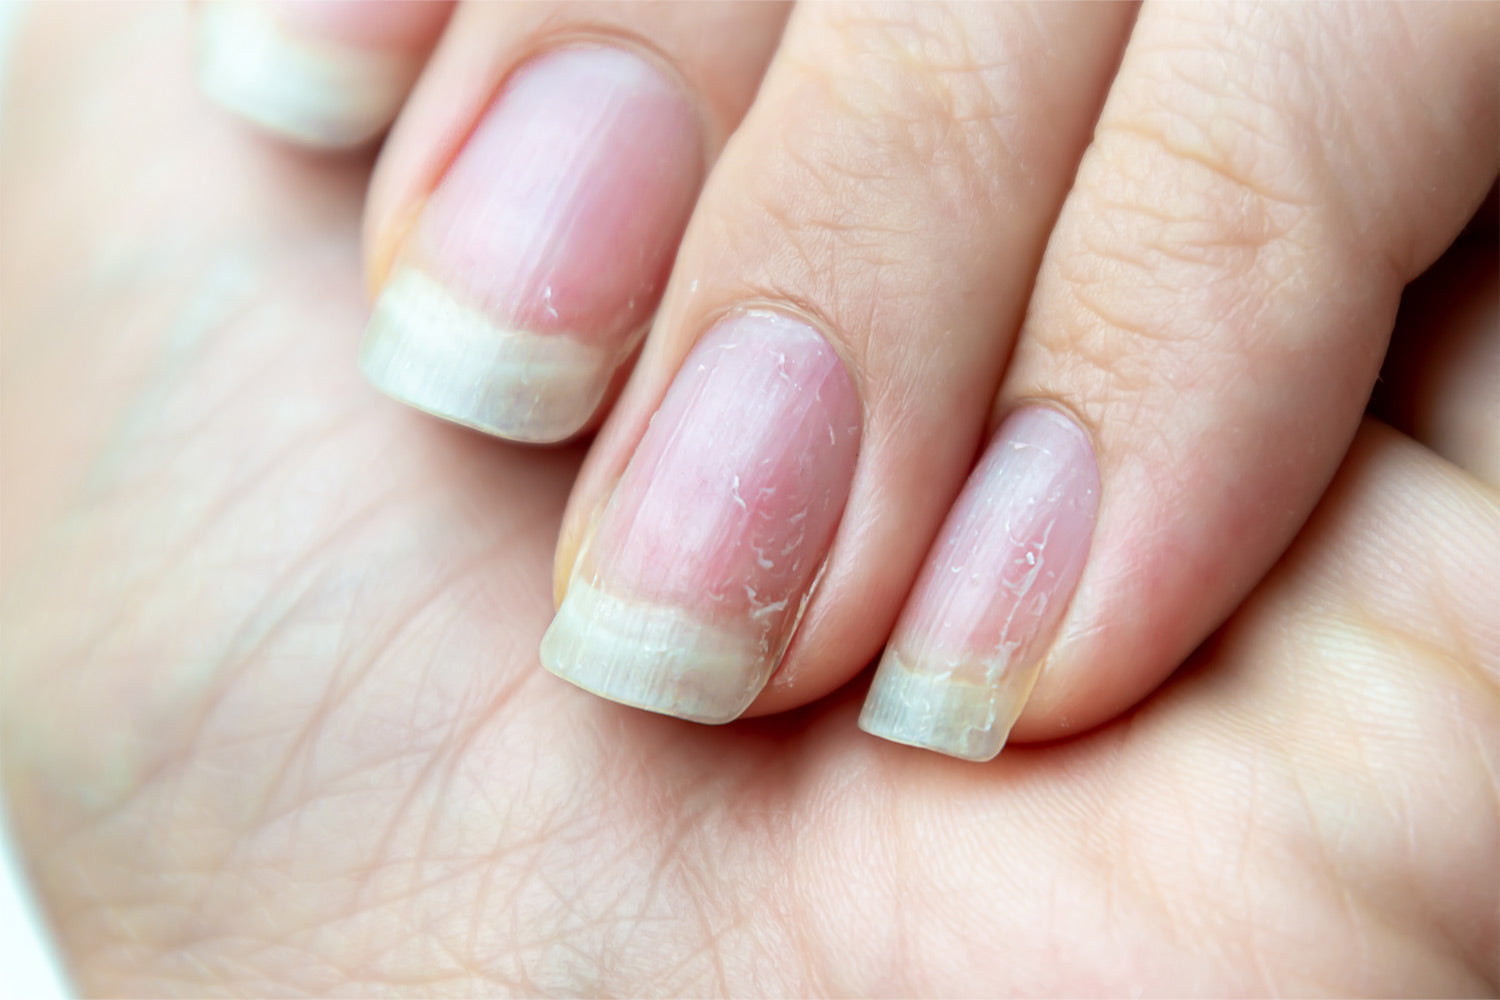 Dry Nails - Type of Nail Problems | SheCares